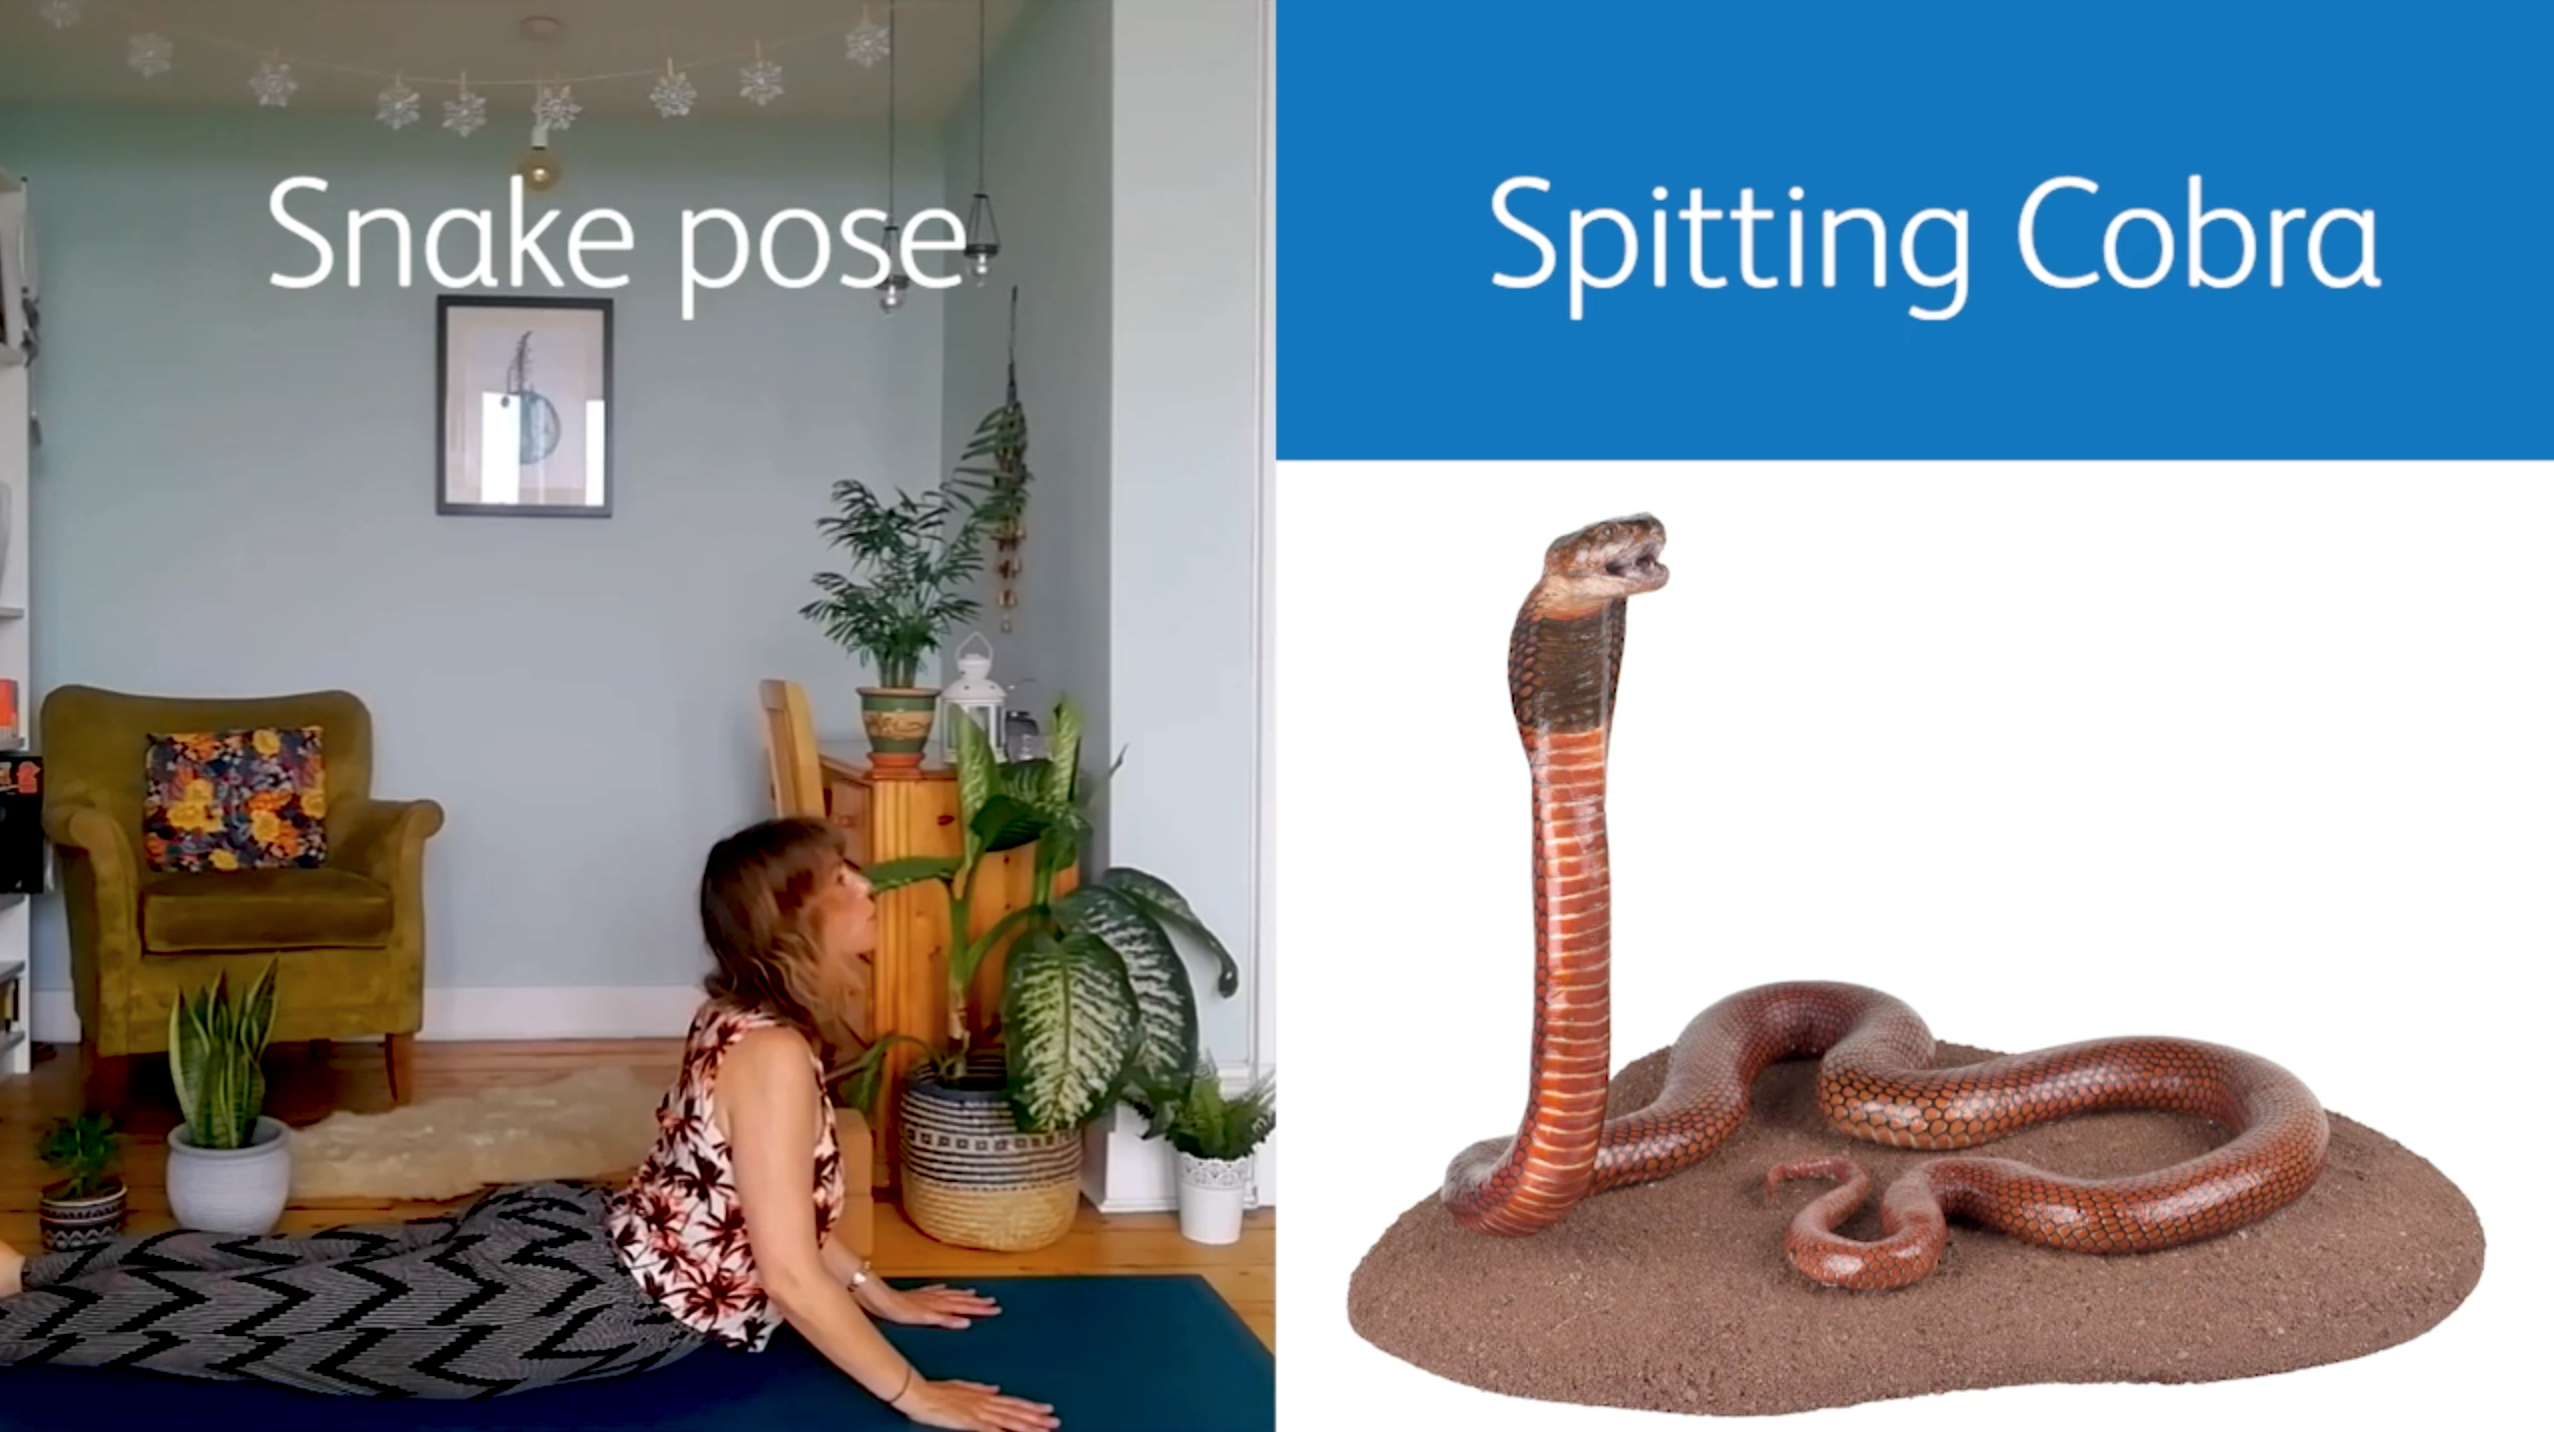 Snake pose inspired by the spitting cobra in our collection